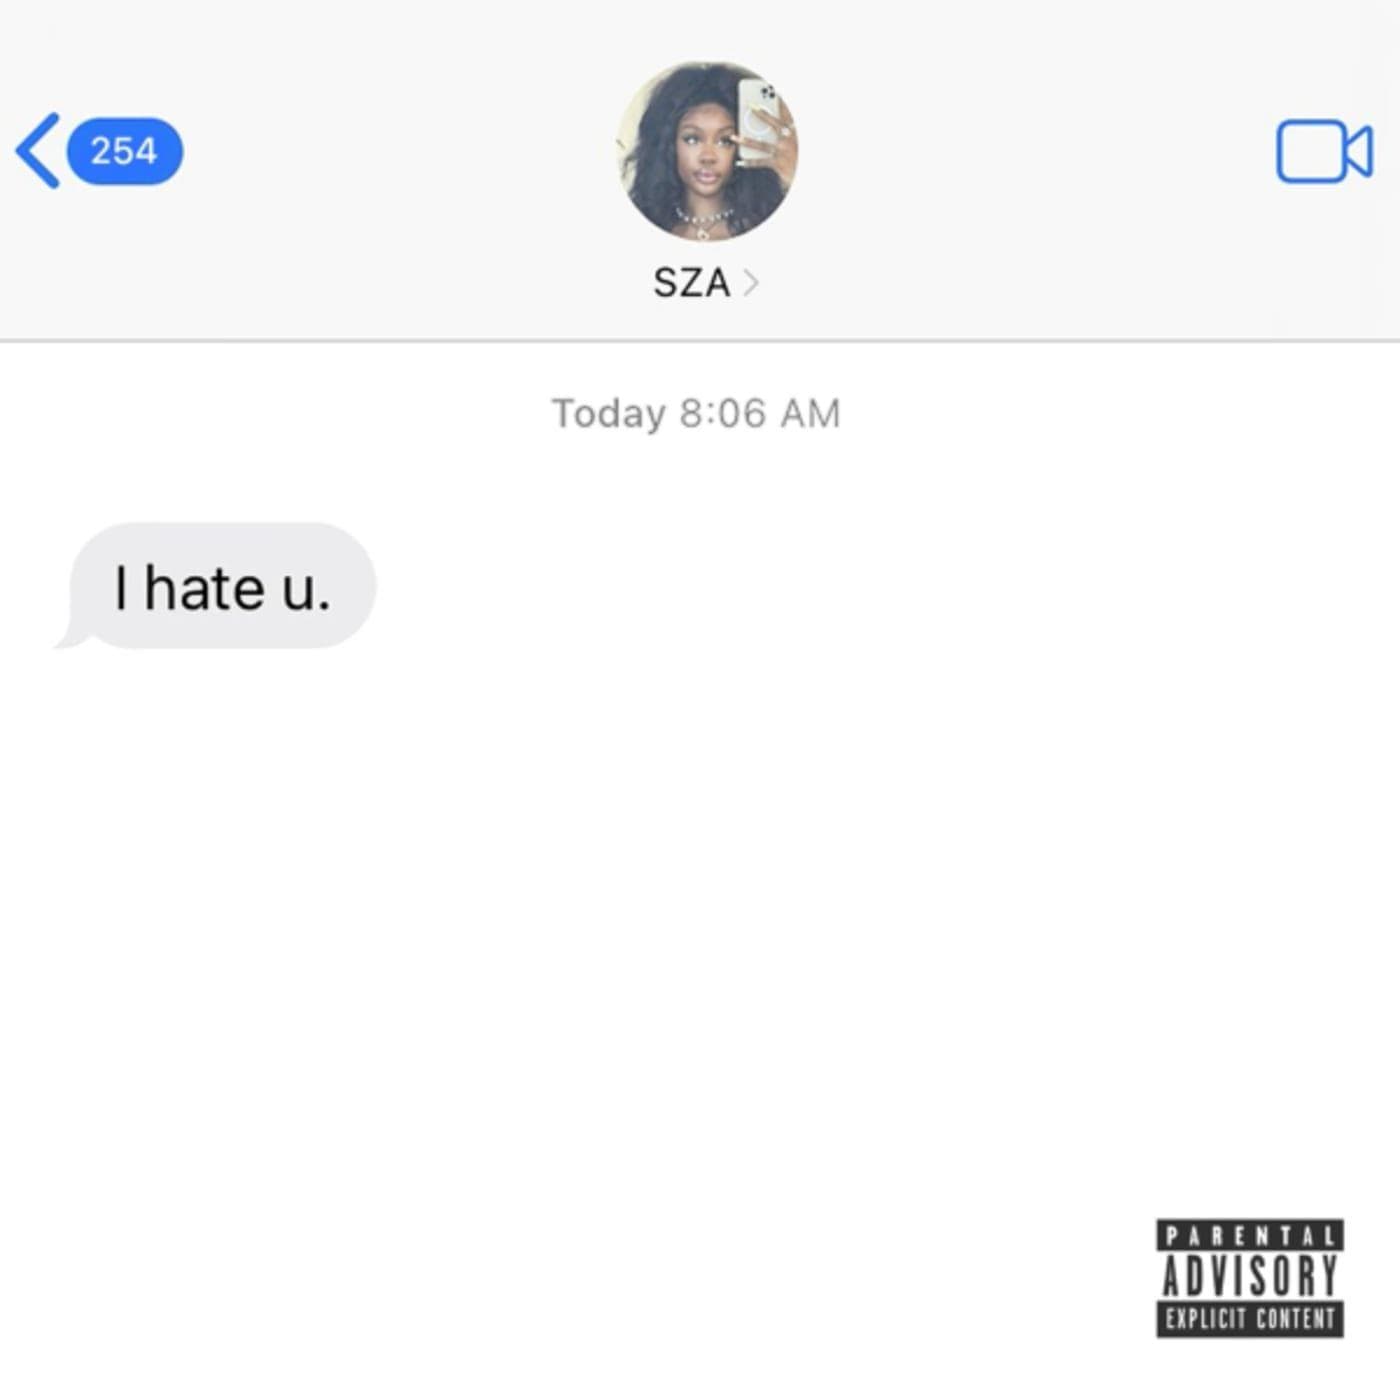 How "I Hate U" by SZA was made